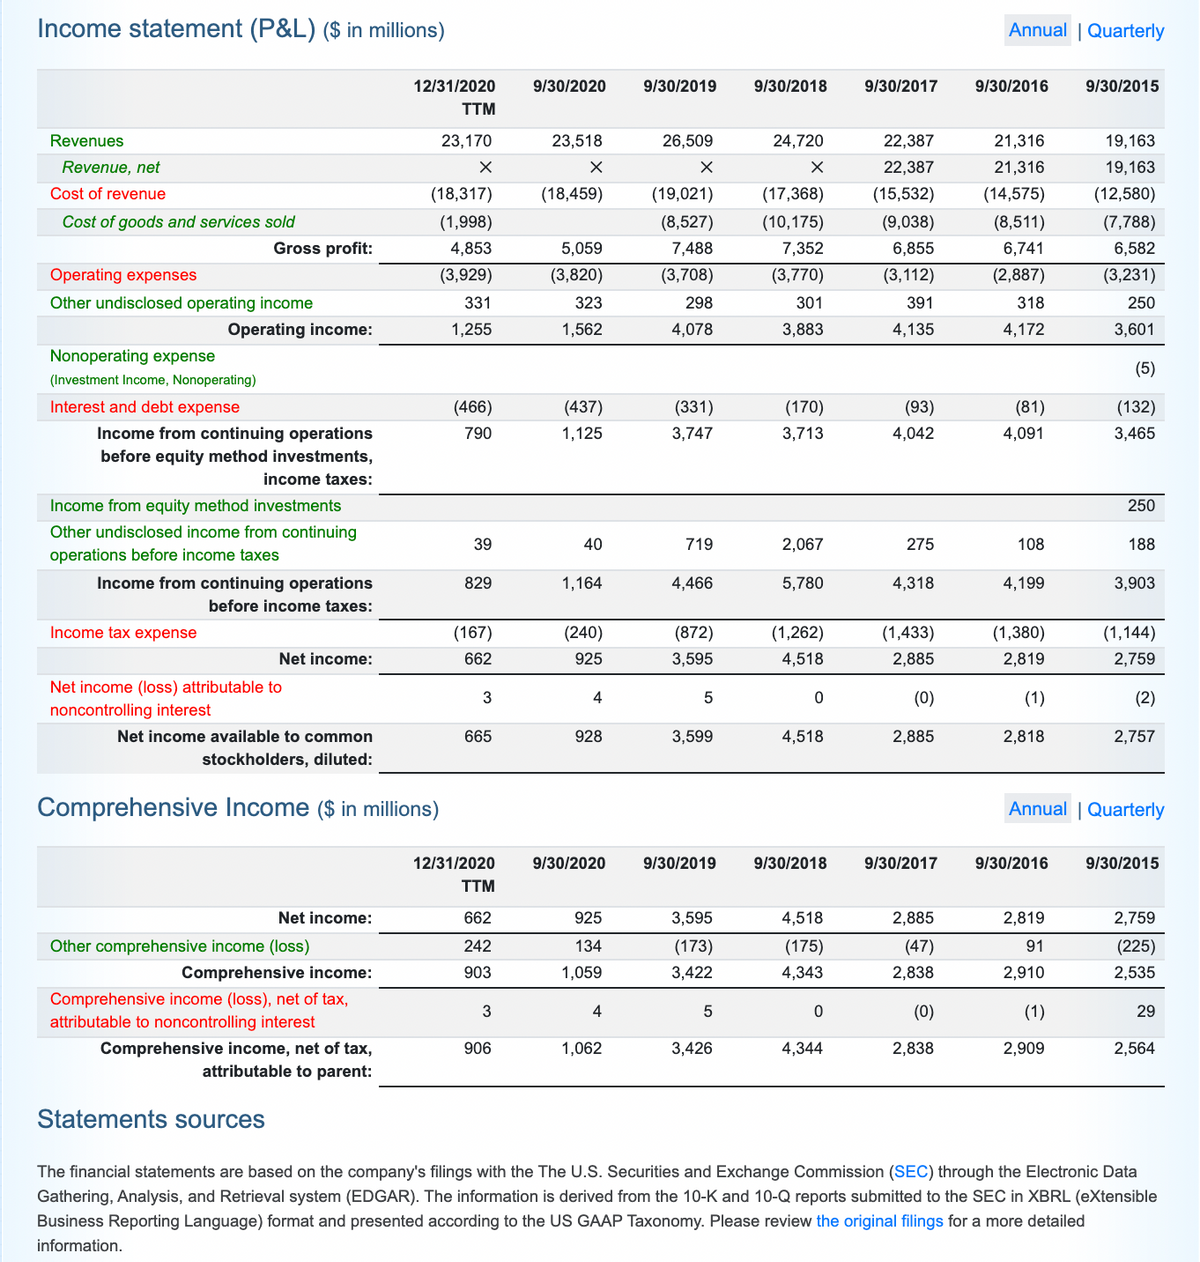 Income statement (P&L) ($ in millions)
Annual | Quarterly
12/31/2020
9/30/2020
9/30/2019
9/30/2018
9/30/2017
9/30/2016
9/30/2015
TTM
Revenues
23,170
23,518
26,509
24,720
22,387
21,316
19,163
Revenue, net
22,387
21,316
19,163
Cost of revenue
(18,317)
(18,459)
(19,021)
(17,368)
(15,532)
(14,575)
(12,580)
Cost of goods and services sold
(1,998)
(8,527)
(10,175)
(9,038)
(8,511)
(7,788)
Gross profit:
4,853
5,059
7,488
7,352
6,855
6,741
6,582
Operating expenses
(3,929)
(3,820)
(3,708)
(3,770)
(3,112)
(2,887)
(3,231)
Other undisclosed operating income
331
323
298
301
391
318
250
Operating income:
1,255
1,562
4,078
3,883
4,135
4,172
3,601
Nonoperating expense
(5)
(Investment Income, Nonoperating)
Interest and debt expense
(466)
(437)
(331)
(170)
(93)
(81)
(132)
Income from continuing operations
790
1,125
3,747
3,713
4,042
4,091
3,465
before equity method investments,
income taxes:
Income from equity method investments
250
Other undisclosed income from continuing
39
40
719
2,067
275
108
188
operations before income taxes
Income from continuing operations
829
1,164
4,466
5,780
4,318
4,199
3,903
before income taxes:
Income tax expense
(167)
(240)
(872)
(1,262)
(1,433)
(1,380)
(1,144)
Net income:
662
925
3,595
4,518
2,885
2,819
2,759
Net income (loss) attributable to
noncontrolling interest
3
4
(0)
(1)
(2)
Net income available to common
665
928
3,599
4,518
2,885
2,818
2,757
stockholders, diluted:
Comprehensive Income ($ in millions)
Annual | Quarterly
12/31/2020
9/30/2020
9/30/2019
9/30/2018
9/30/2017
9/30/2016
9/30/2015
TTM
Net income:
662
925
3,595
4,518
2,885
2,819
2,759
Other comprehensive income (loss)
242
134
(173)
(175)
(47)
91
(225)
Comprehensive income:
903
1,059
3,422
4,343
2,838
2,910
2,535
Comprehensive income (loss), net of tax,
attributable to noncontrolling interest
4
(0)
(1)
29
2,838
Comprehensive income, net of tax,
attributable to parent:
906
1,062
3,426
4,344
2,909
2,564
Statements sources
The financial statements are based on the company's filings with the The U.S. Securities and Exchange Commission (SEC) through the Electronic Data
Gathering, Analysis, and Retrieval system (EDGAR). The information is derived from the 10-K and 10-Q reports submitted to the SEC in XBRL (eXtensible
Business Reporting Language) format and presented according to the US GAAP Taxonomy. Please review the original filings for a more detailed
information.
